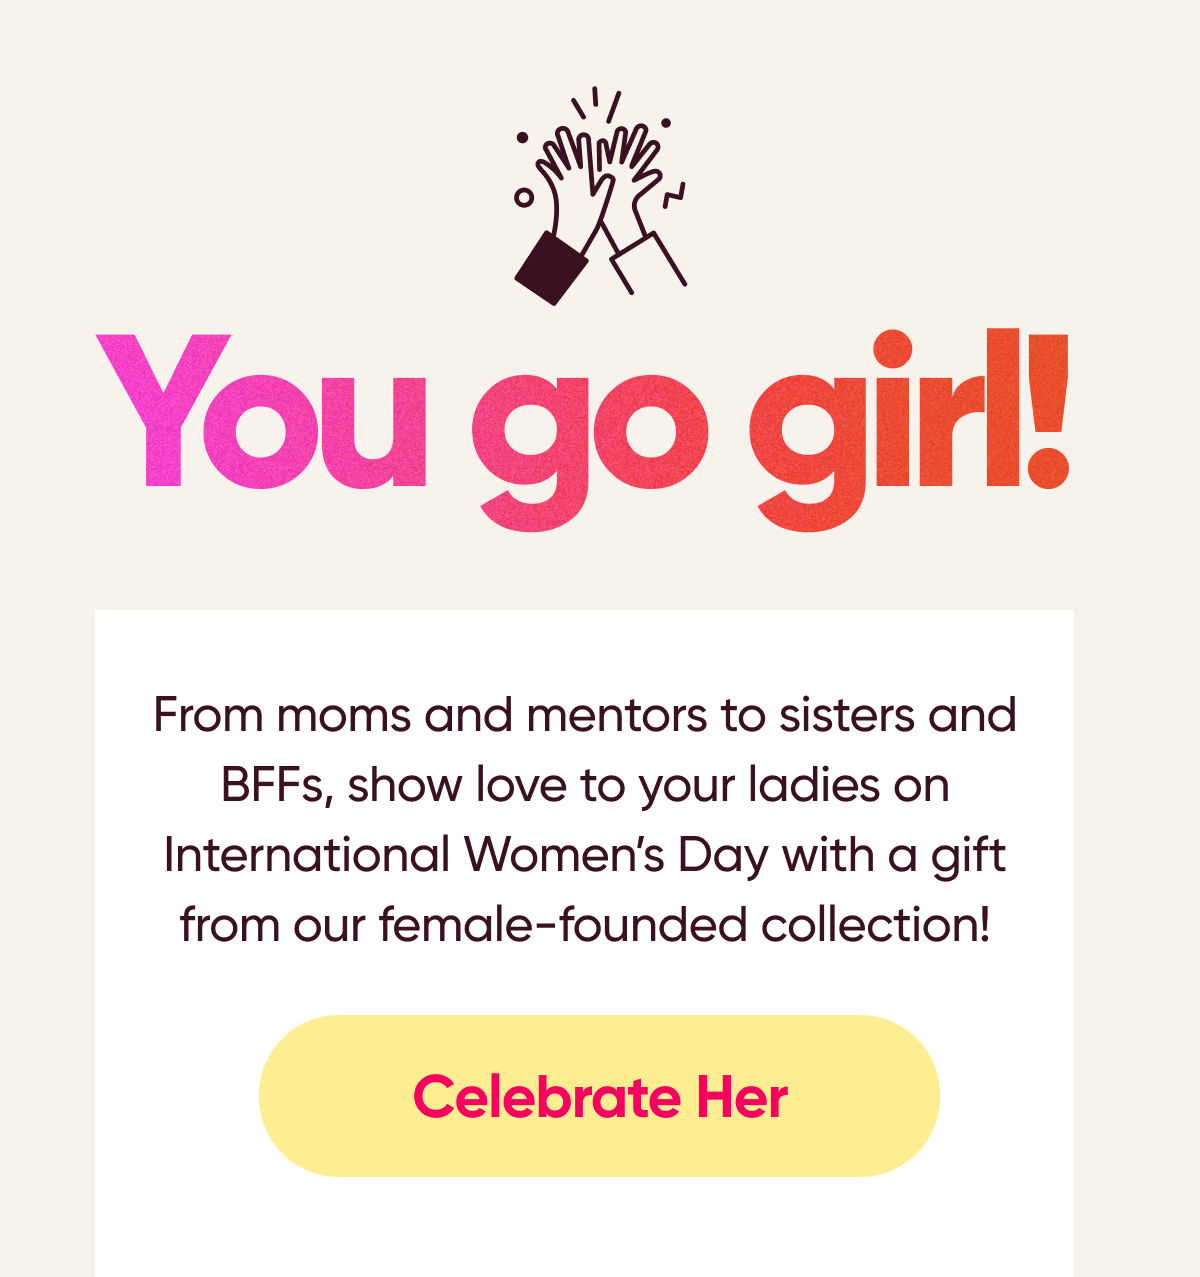 You go girl! From moms and mentors to sisters and BFFs, show love to your ladies on International Womens Day with a gift from our female-founded collection! Celebrate Her